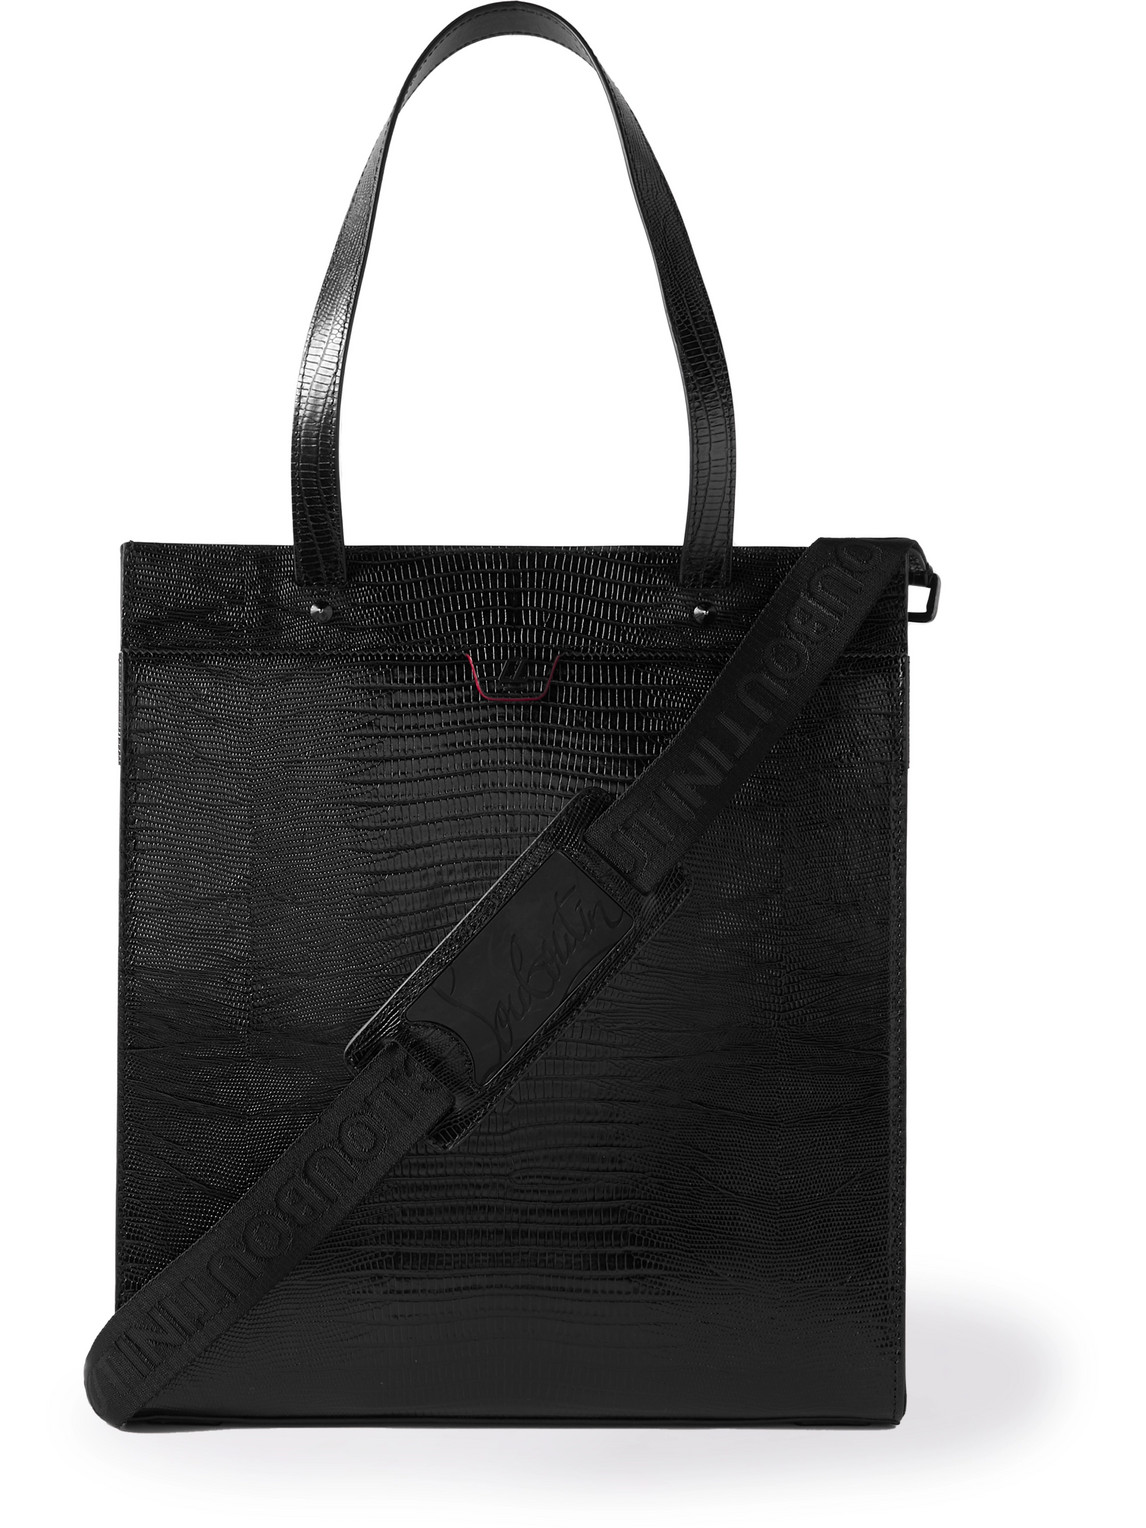 Christian Louboutin Studded Croc-effect Leather Tote Bag In Black